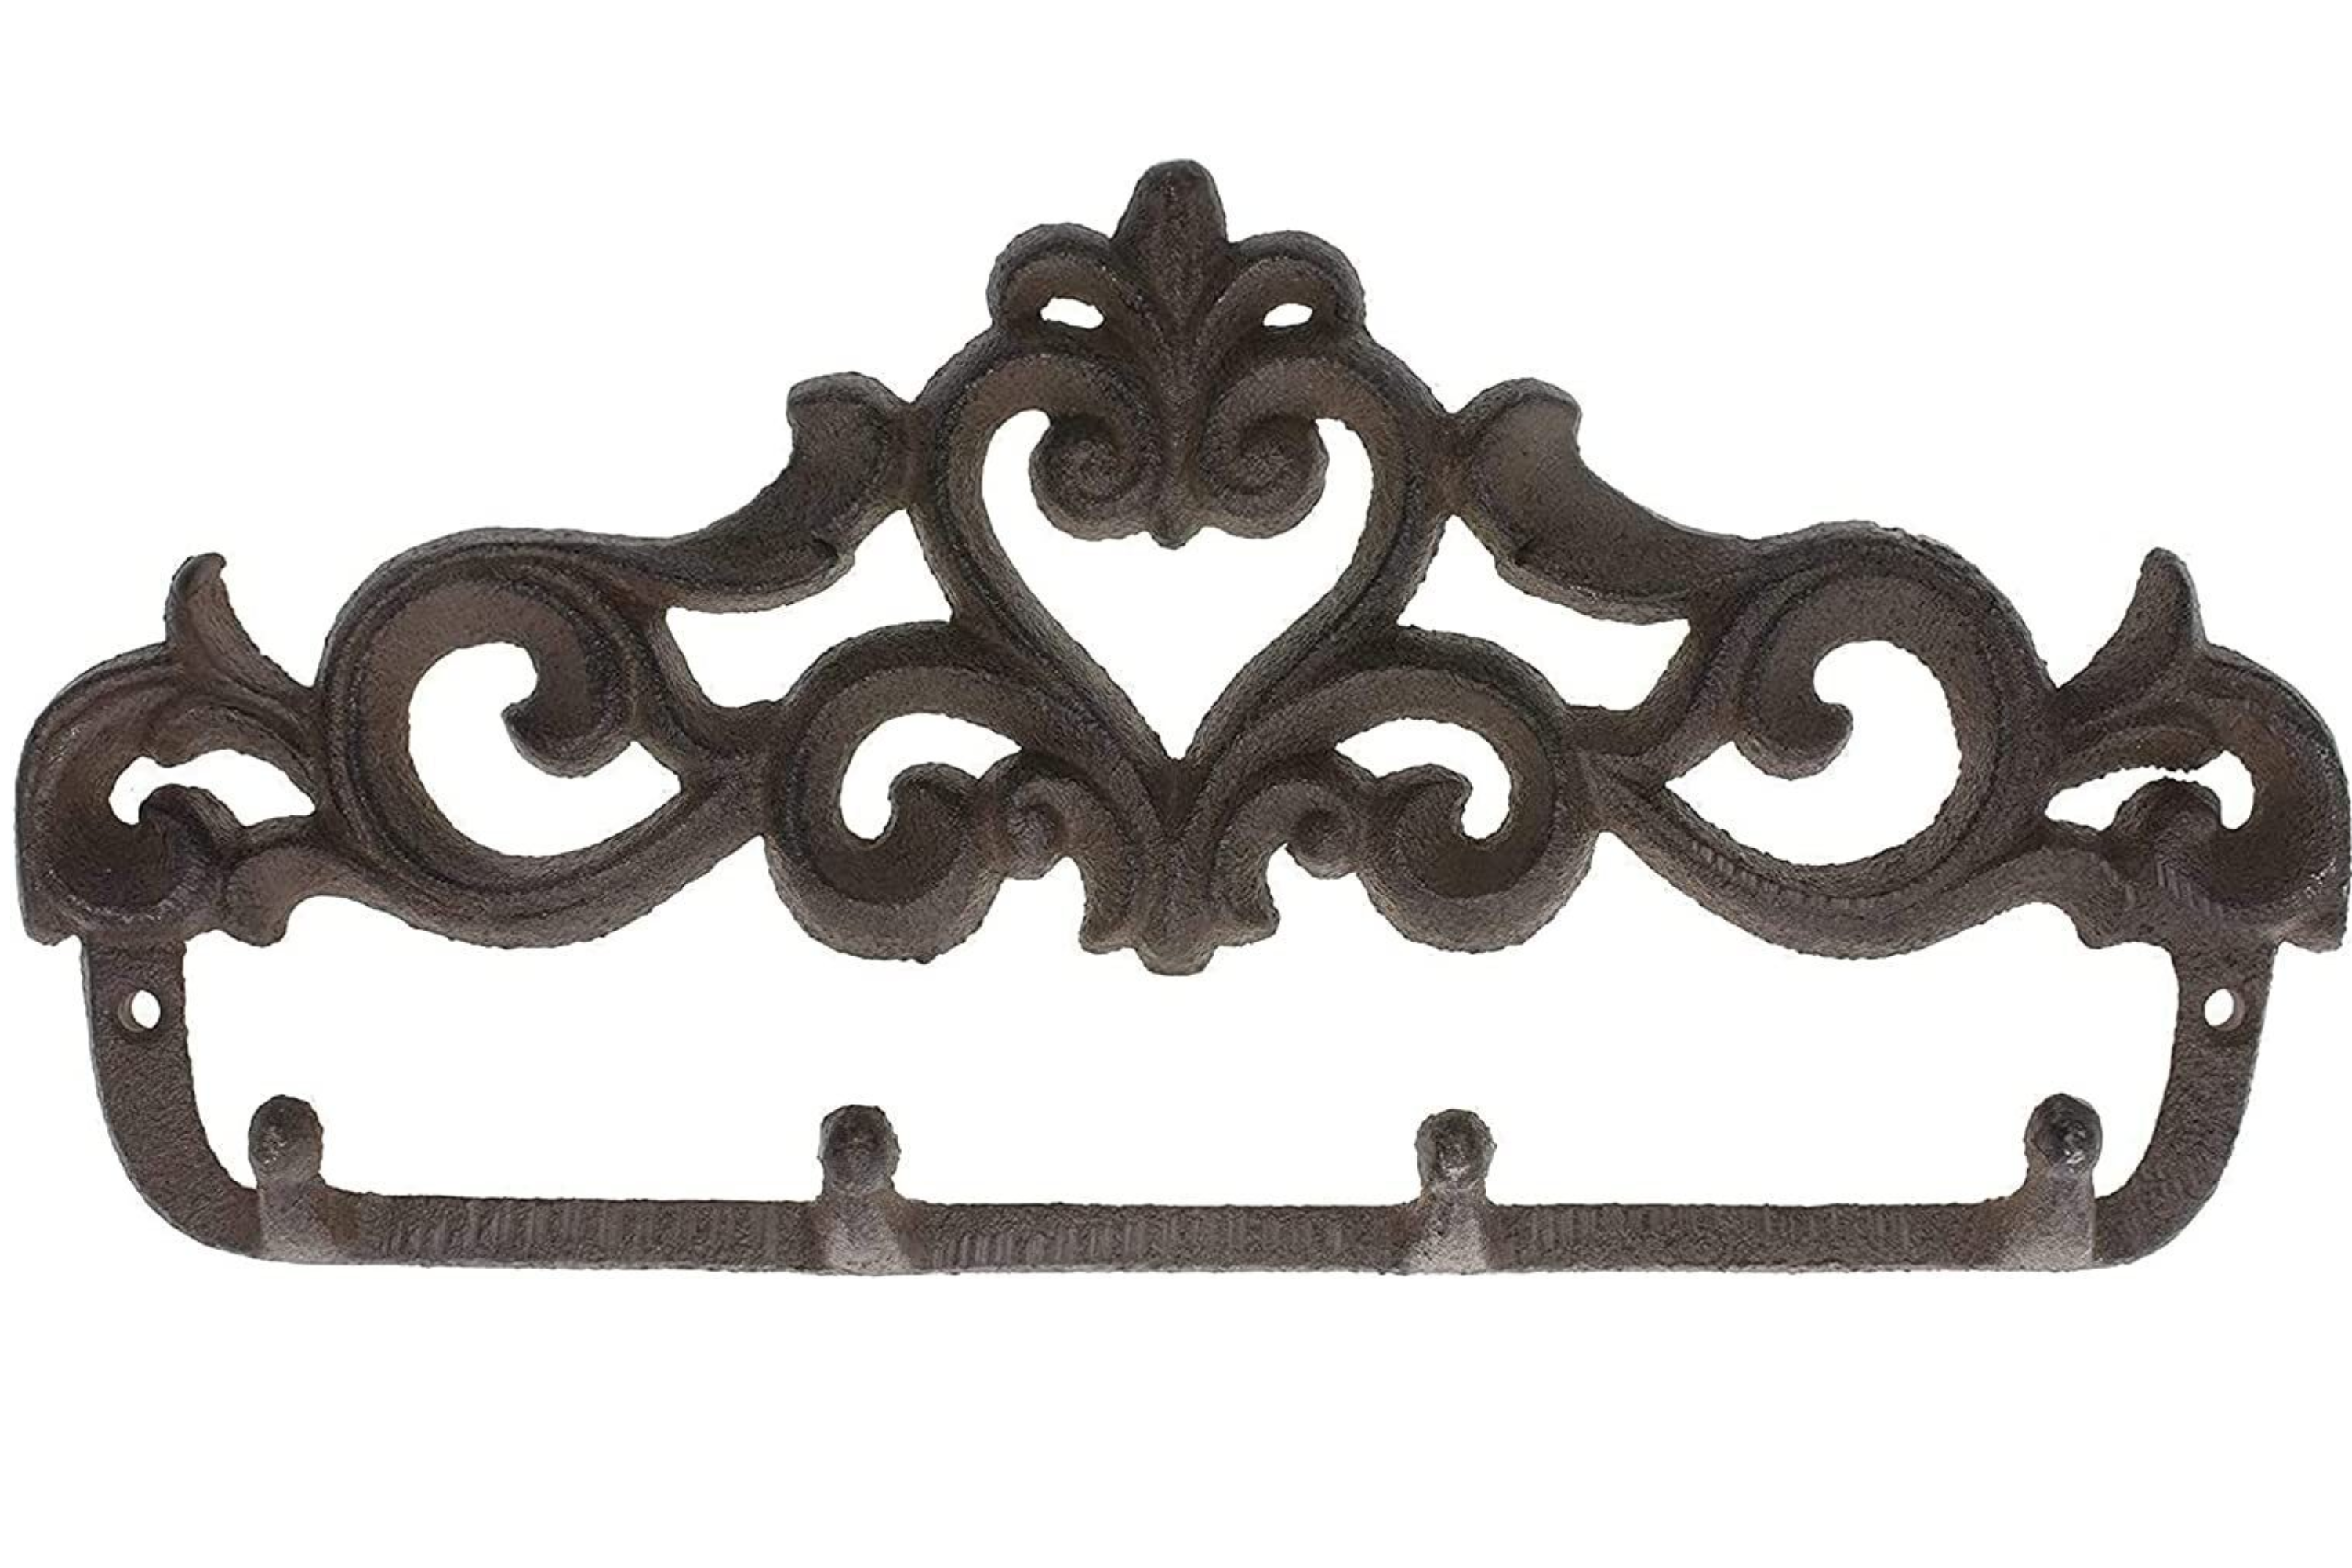 Comfify Decorative Cast Iron Wall Hook Rack - Vintage Design Hanger with 4 Hooks - for Coats, Hats, Keys, Towels, Clothes, Aprons Etc |Wall Mounted 